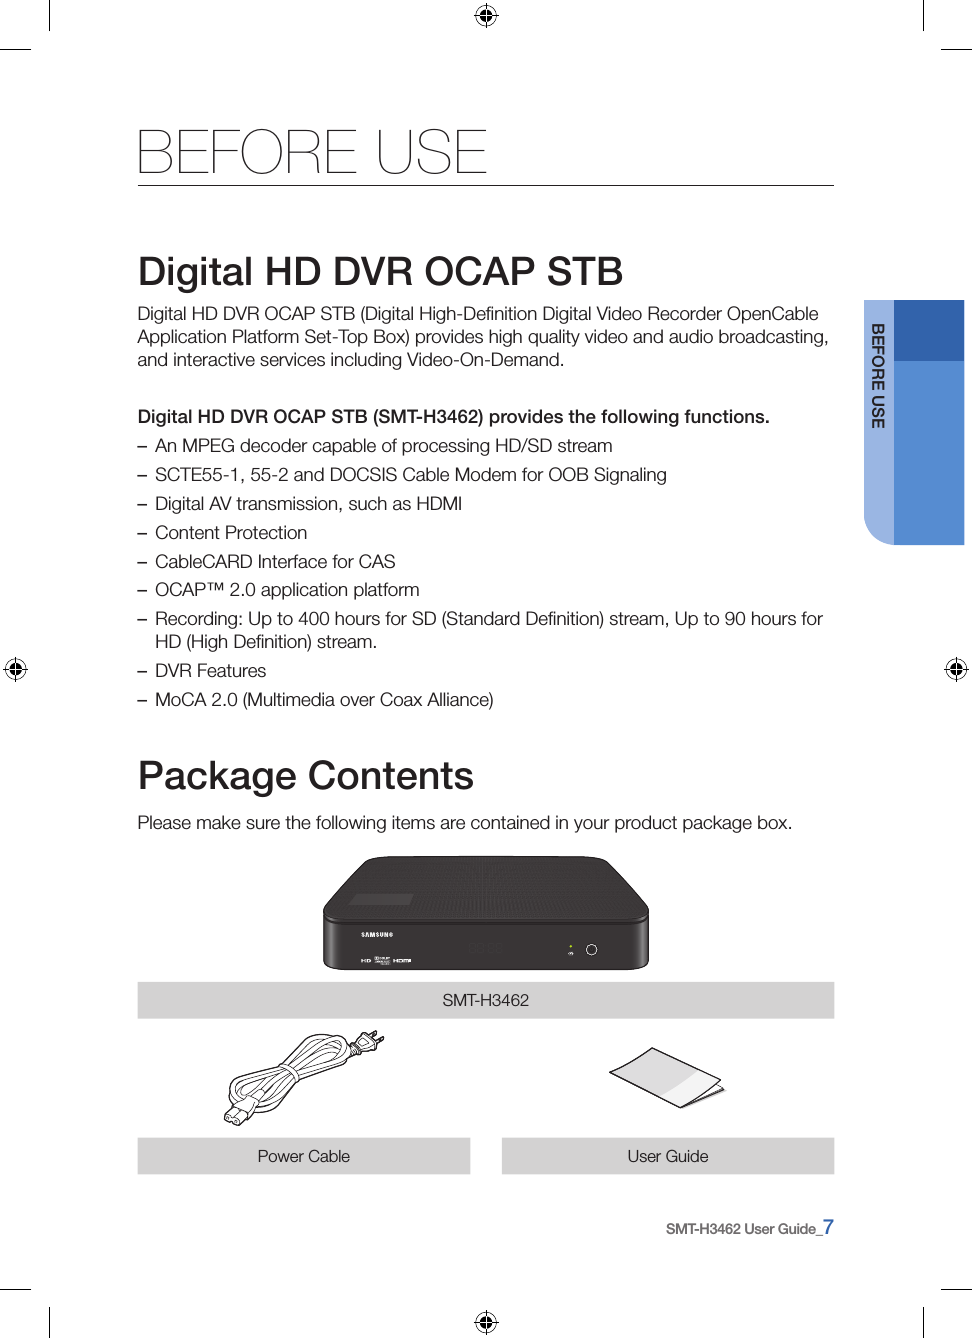 SMT-H3462 User Guide_7BEFORE USEBEFORE USEDigital HD DVR OCAP STBDigital HD DVR OCAP STB (Digital High-Deﬁnition Digital Video Recorder OpenCable Application Platform Set-Top Box) provides high quality video and audio broadcasting, and interactive services including Video-On-Demand.Digital HD DVR OCAP STB (SMT-H3462) provides the following functions. –An MPEG decoder capable of processing HD/SD stream –SCTE55-1, 55-2 and DOCSIS Cable Modem for OOB Signaling –Digital AV transmission, such as HDMI –Content Protection –CableCARD Interface for CAS  –OCAP™ 2.0 application platform –Recording: Up to 400 hours for SD (Standard Deﬁnition) stream, Up to 90 hours for HD (High Deﬁnition) stream. –DVR Features –MoCA 2.0 (Multimedia over Coax Alliance)Package ContentsPlease make sure the following items are contained in your product package box.SMT-H3462Power Cable User Guide